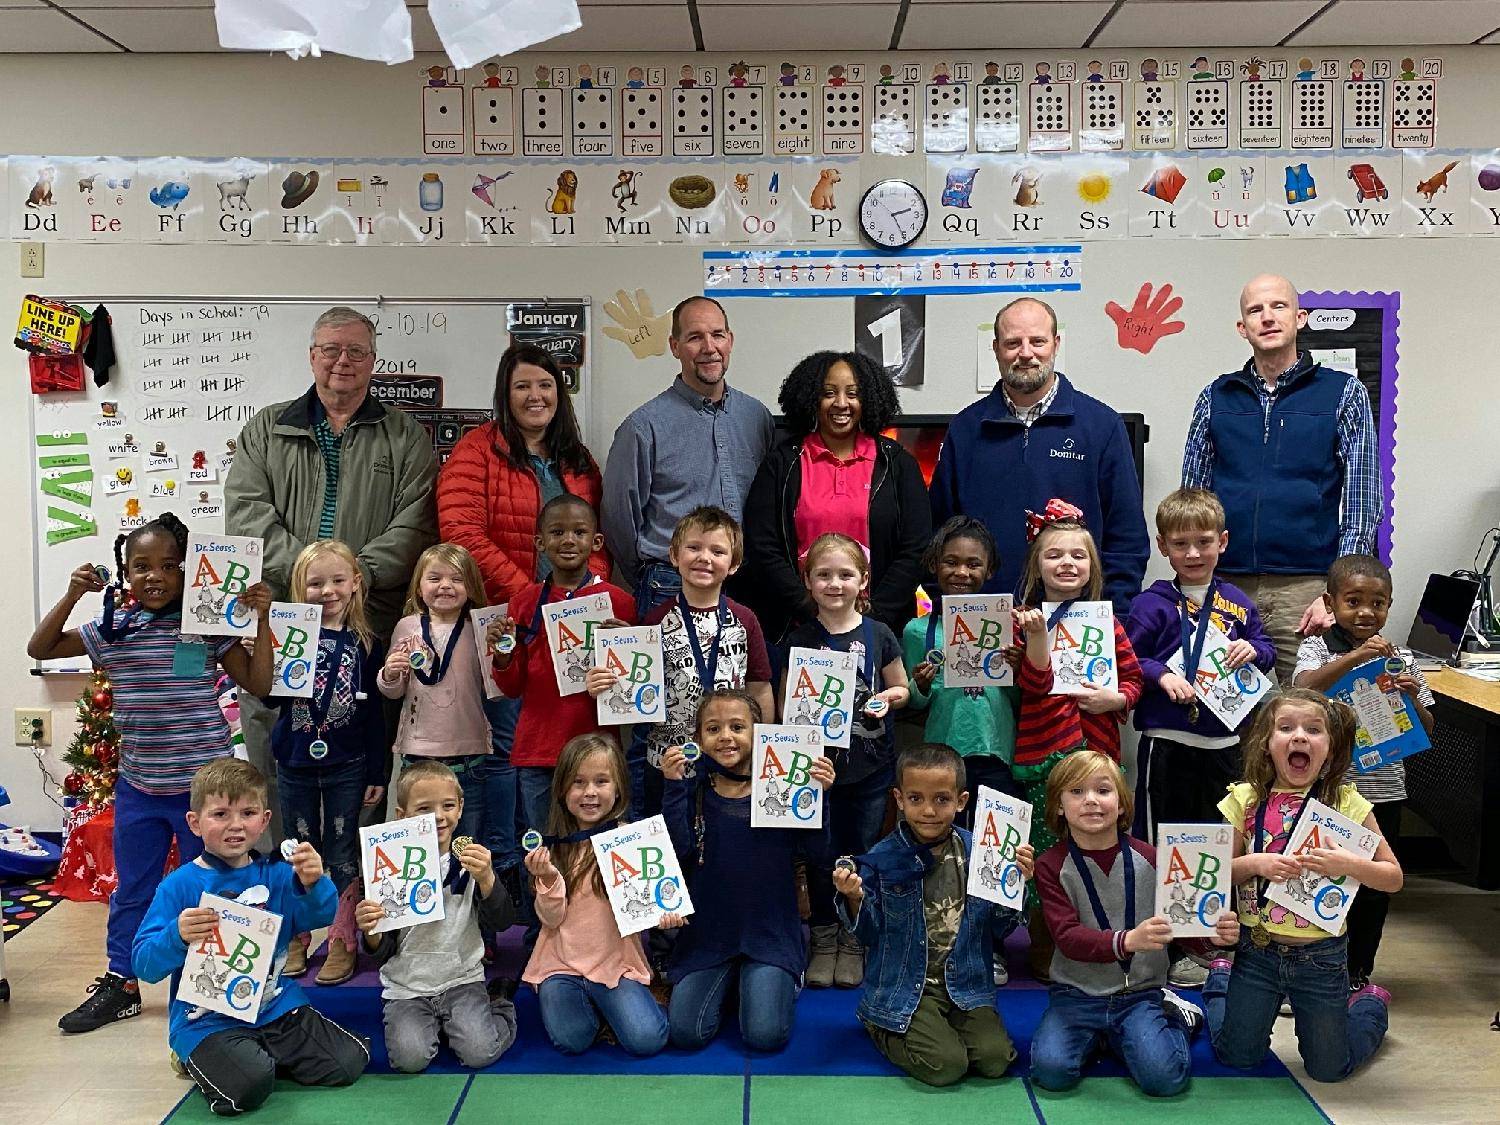 Employees from our mill in Ashdown, AR, visit a local school for a First Book reading event, where each child receives a book of their own at the end.